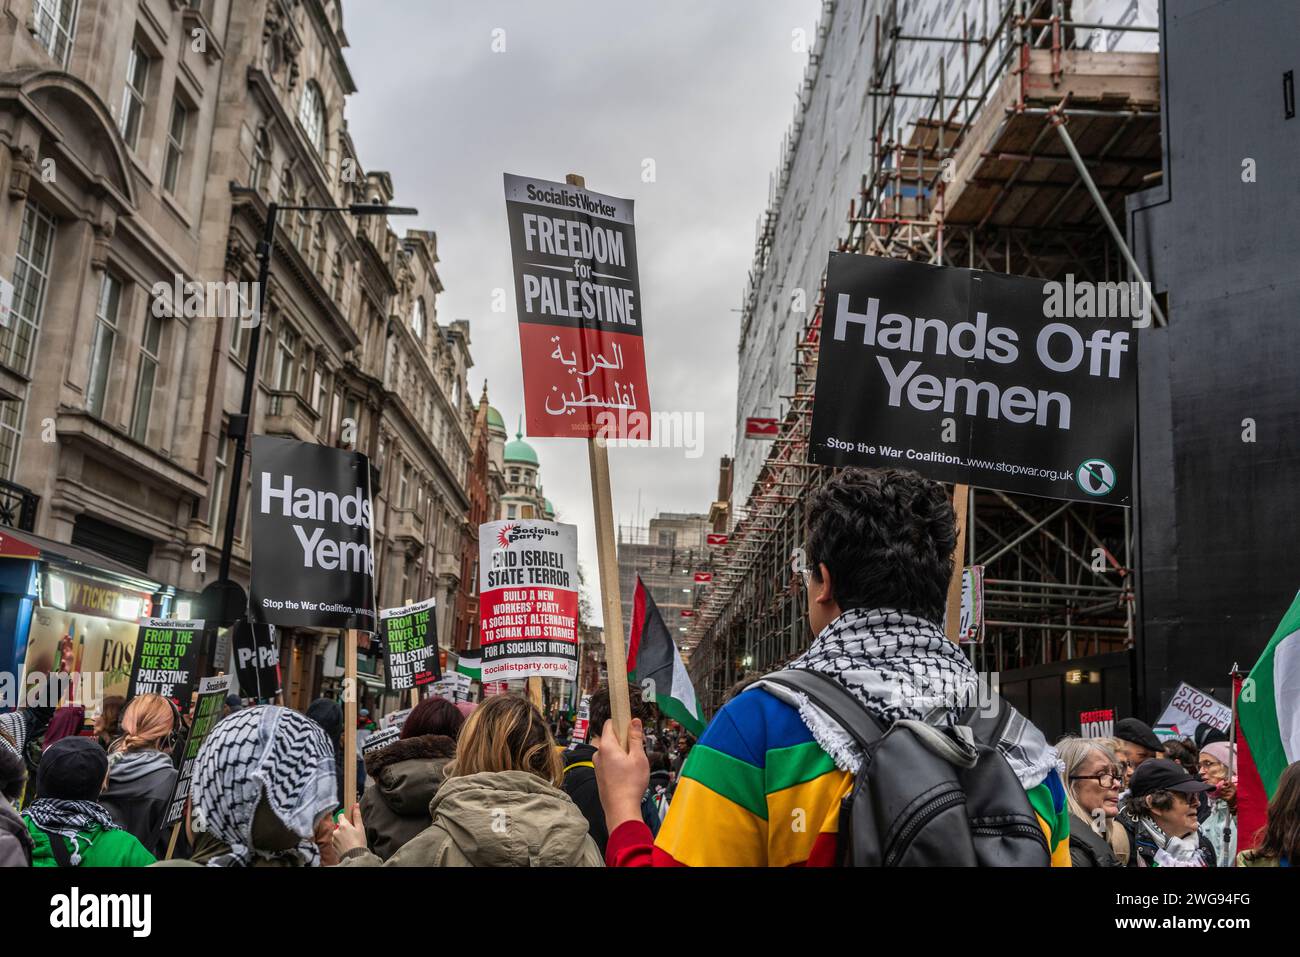 London, UK. 3rd February 2024. Freedom for Palestine and Hands off Yemen banners held by peace activists and protesters during the Pro - Palestine march through Oxford Street in Soho, Free Palestine Movement, London, UK Stock Photo